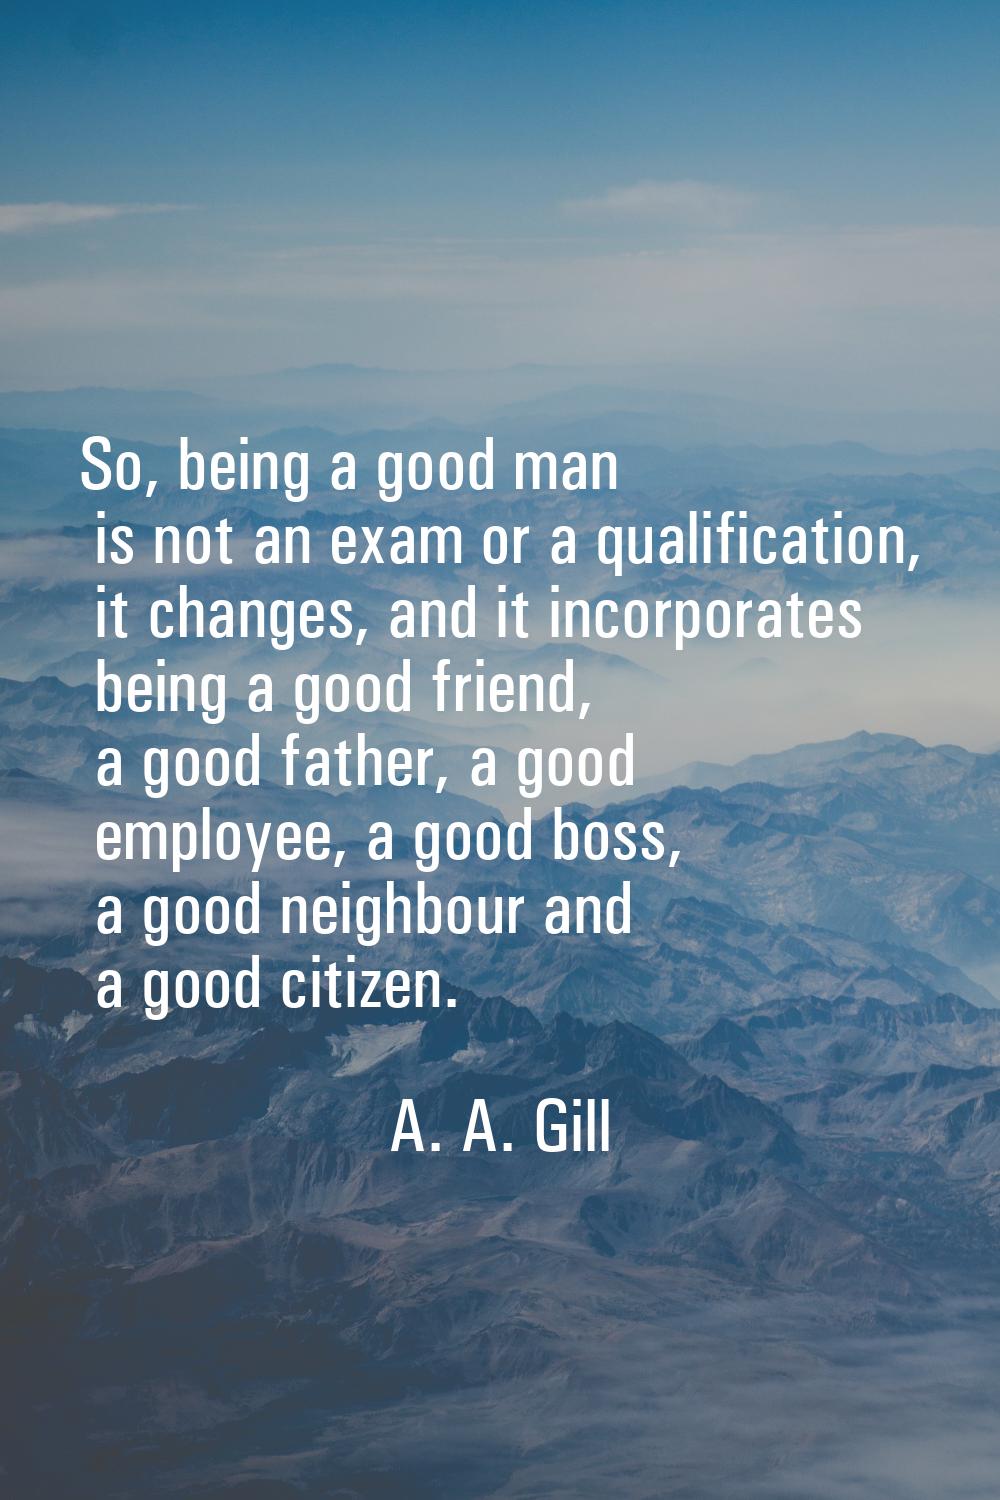 So, being a good man is not an exam or a qualification, it changes, and it incorporates being a goo